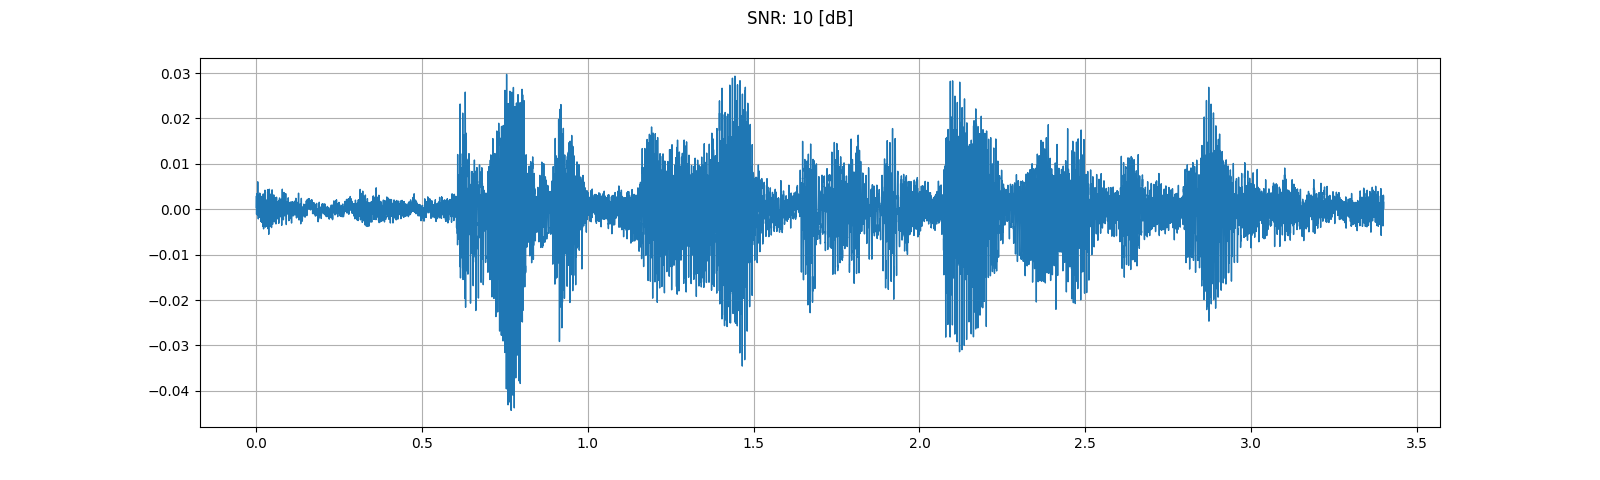 ../_images/sphx_glr_audio_preprocessing_tutorial_033.png